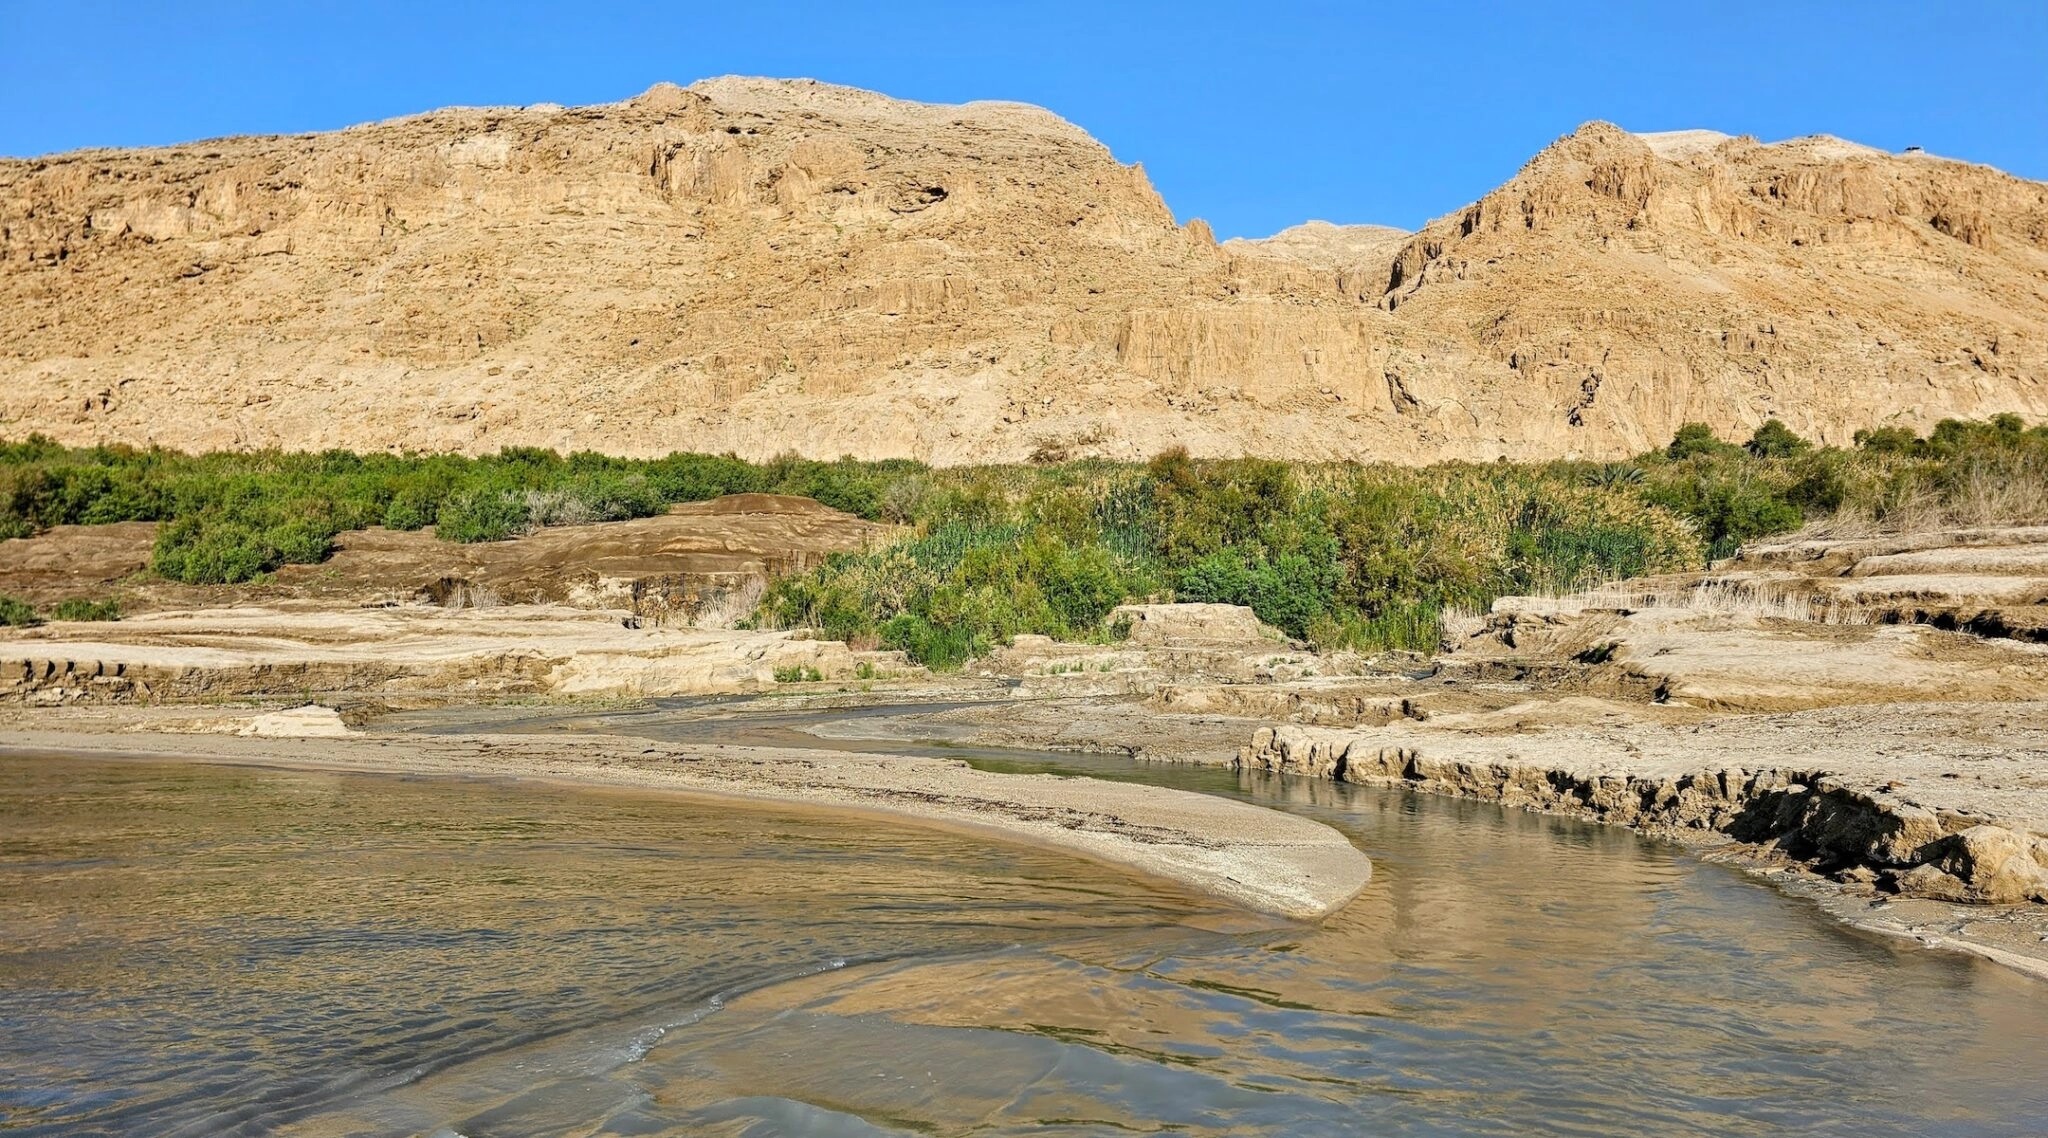 Boat trip aimed at saving Dead Sea also explores marvels revealed